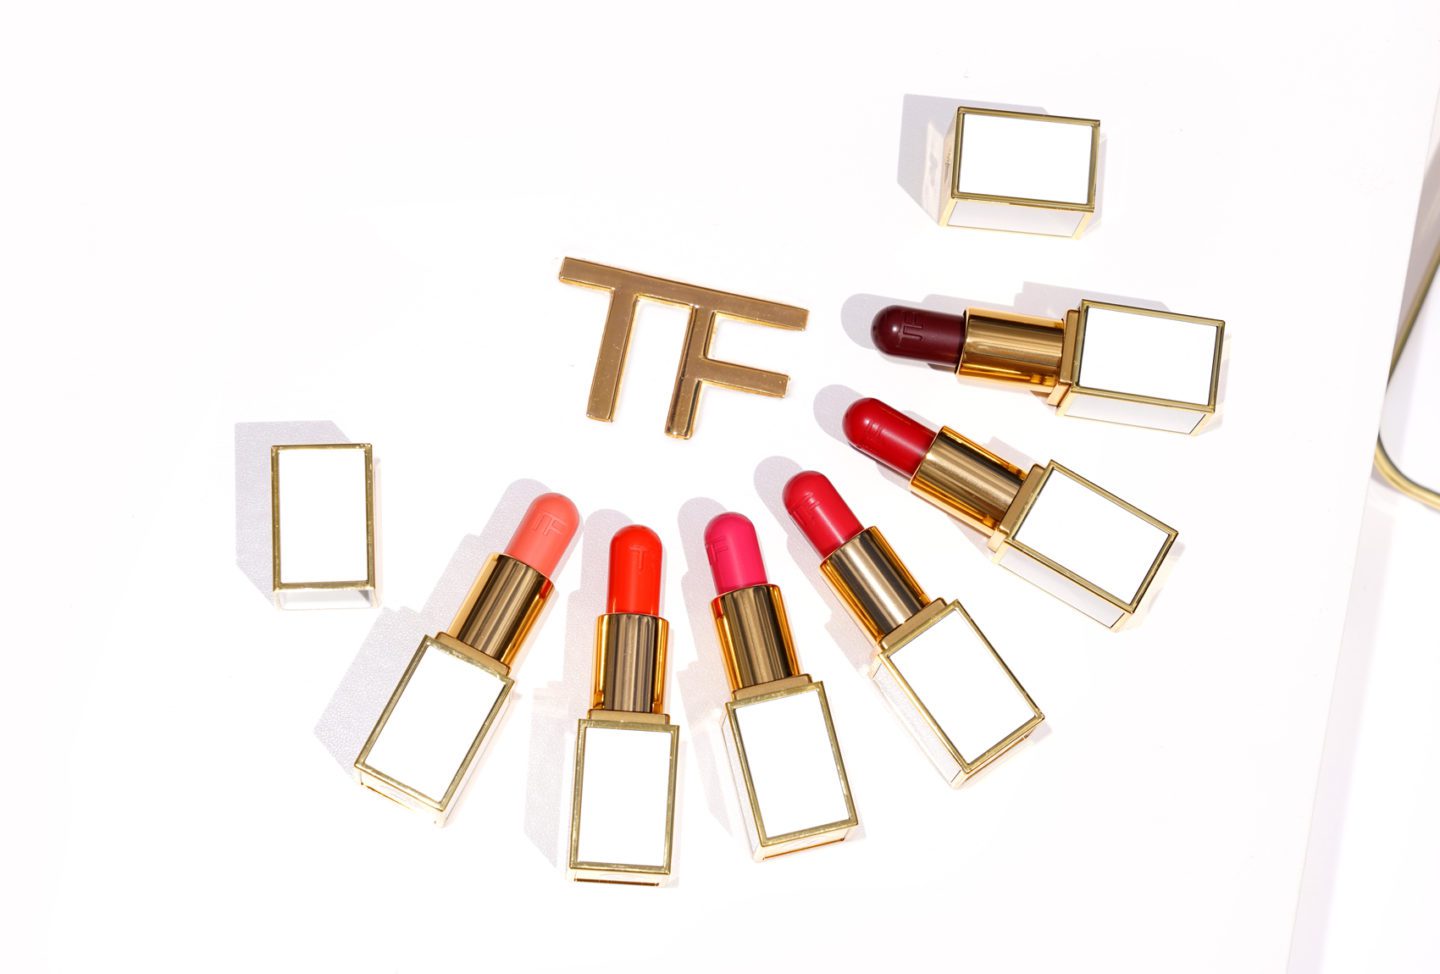 Tom Ford Clutch Sized Lip Balms | The Beauty Look Book